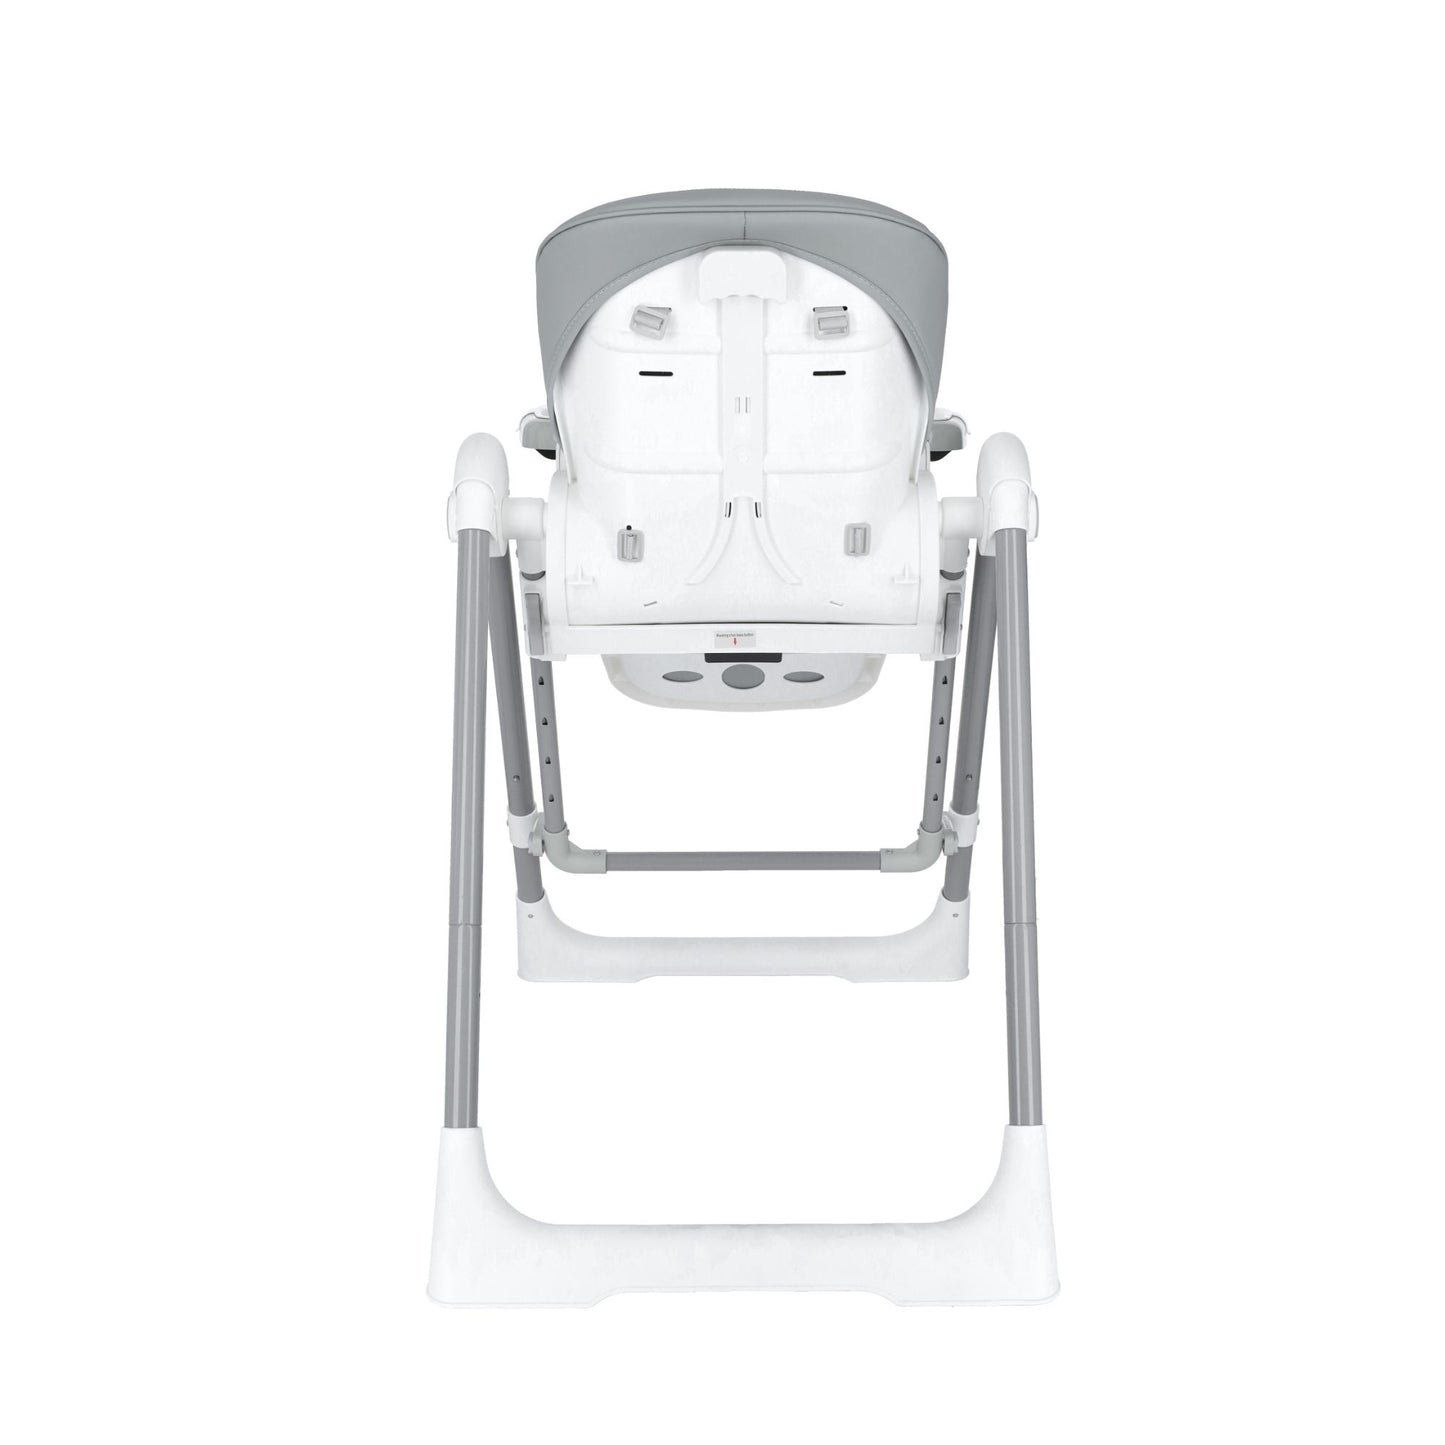 Bonbijou Relax 2-In-1 High Chair With Swing